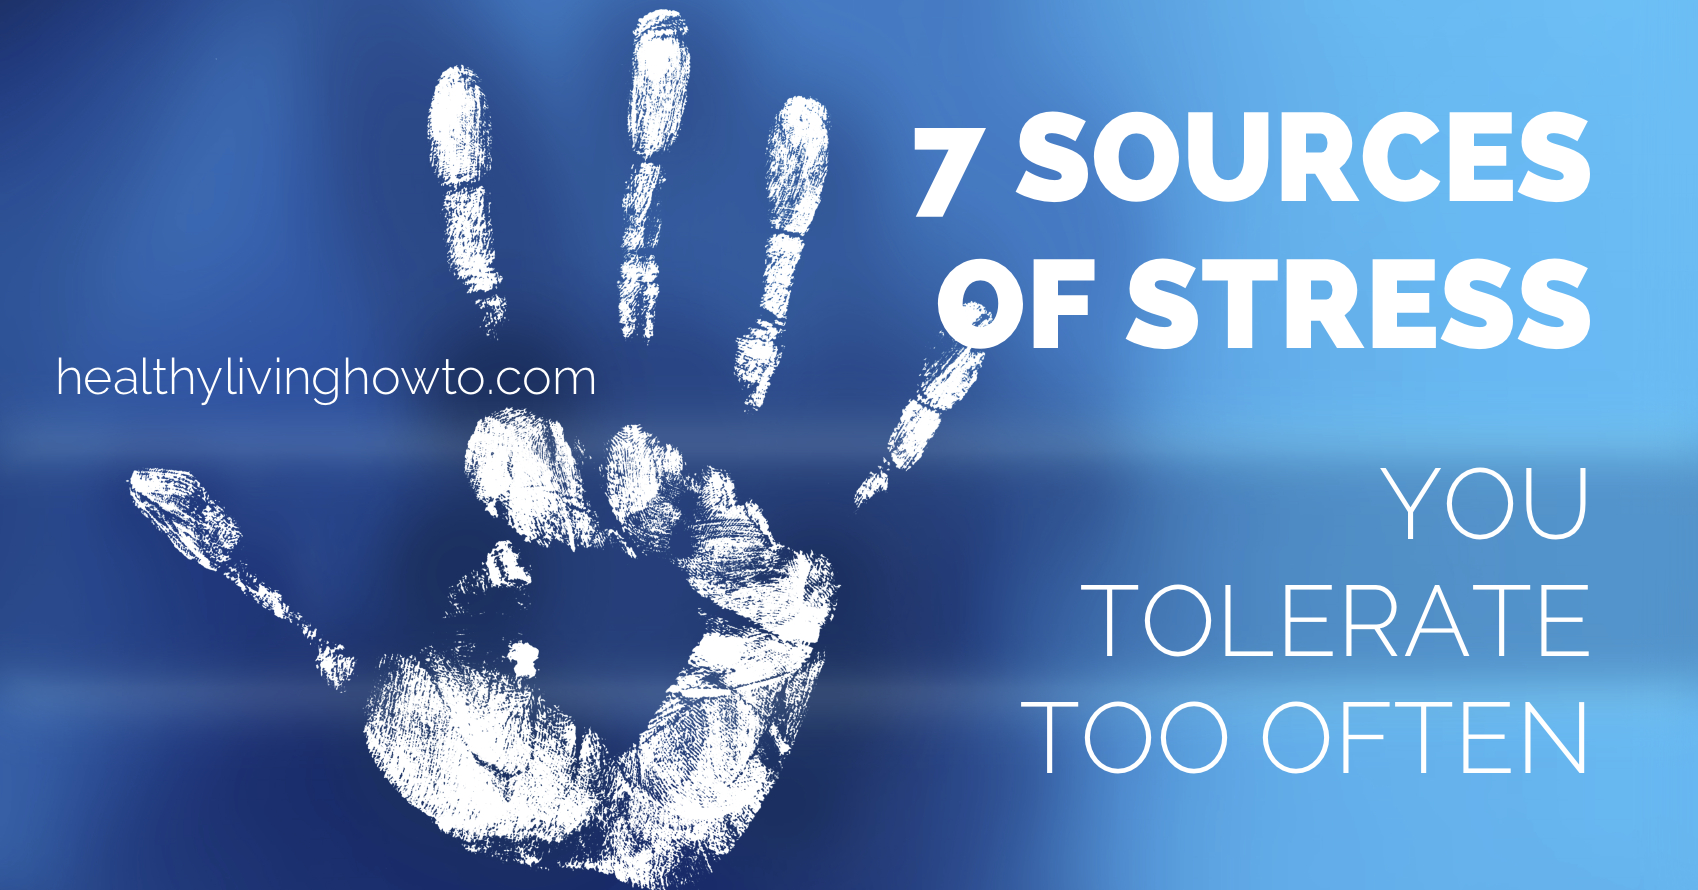 7 Sources of Stress You Tolerate Too Often | healthylivinghowto.com